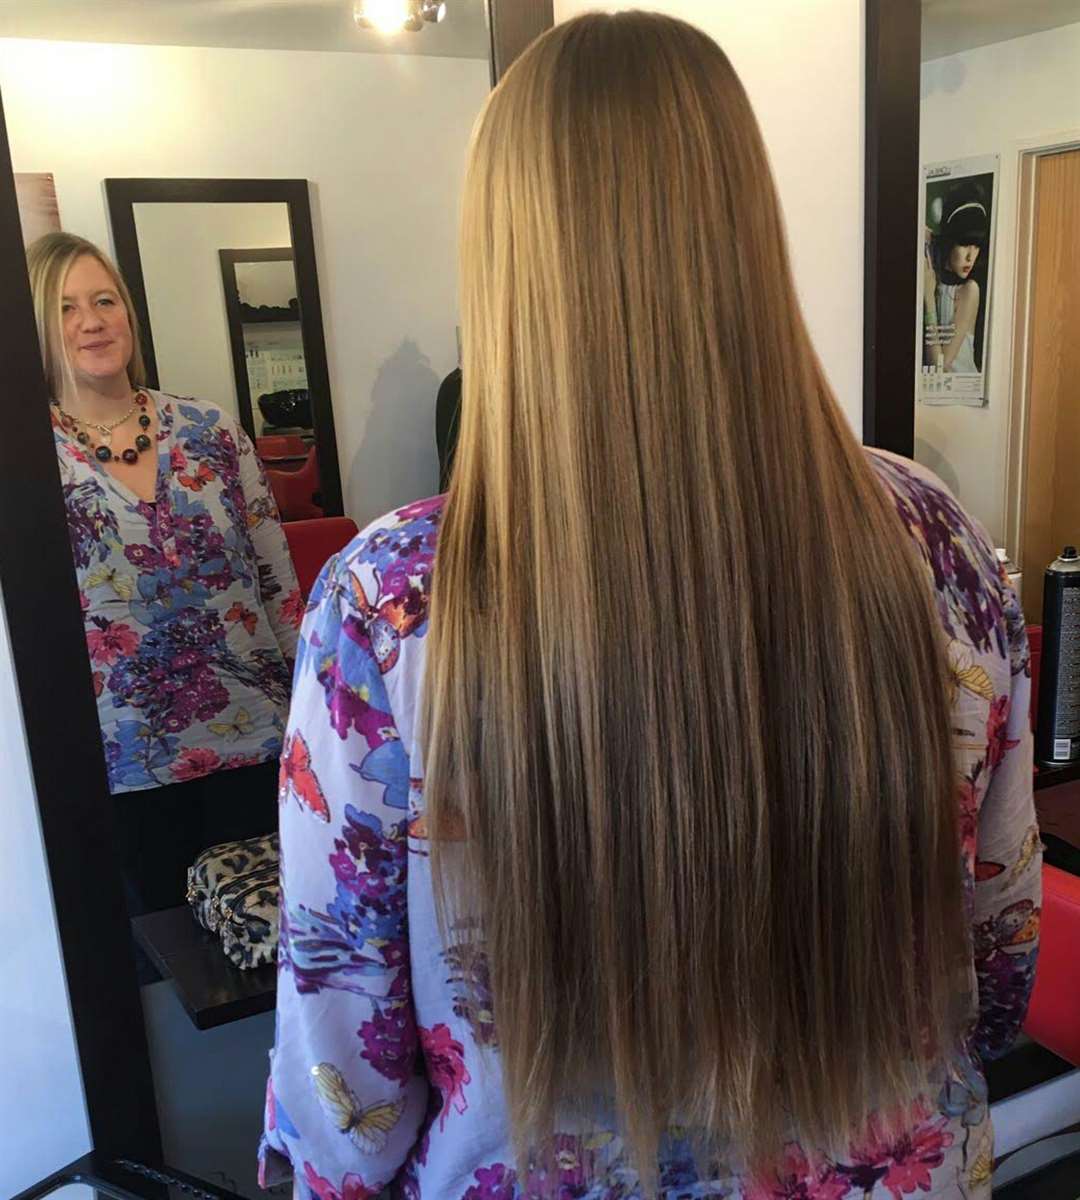 Wendy King will be cutting her long locks to raise money for Theo's Mission to Walk